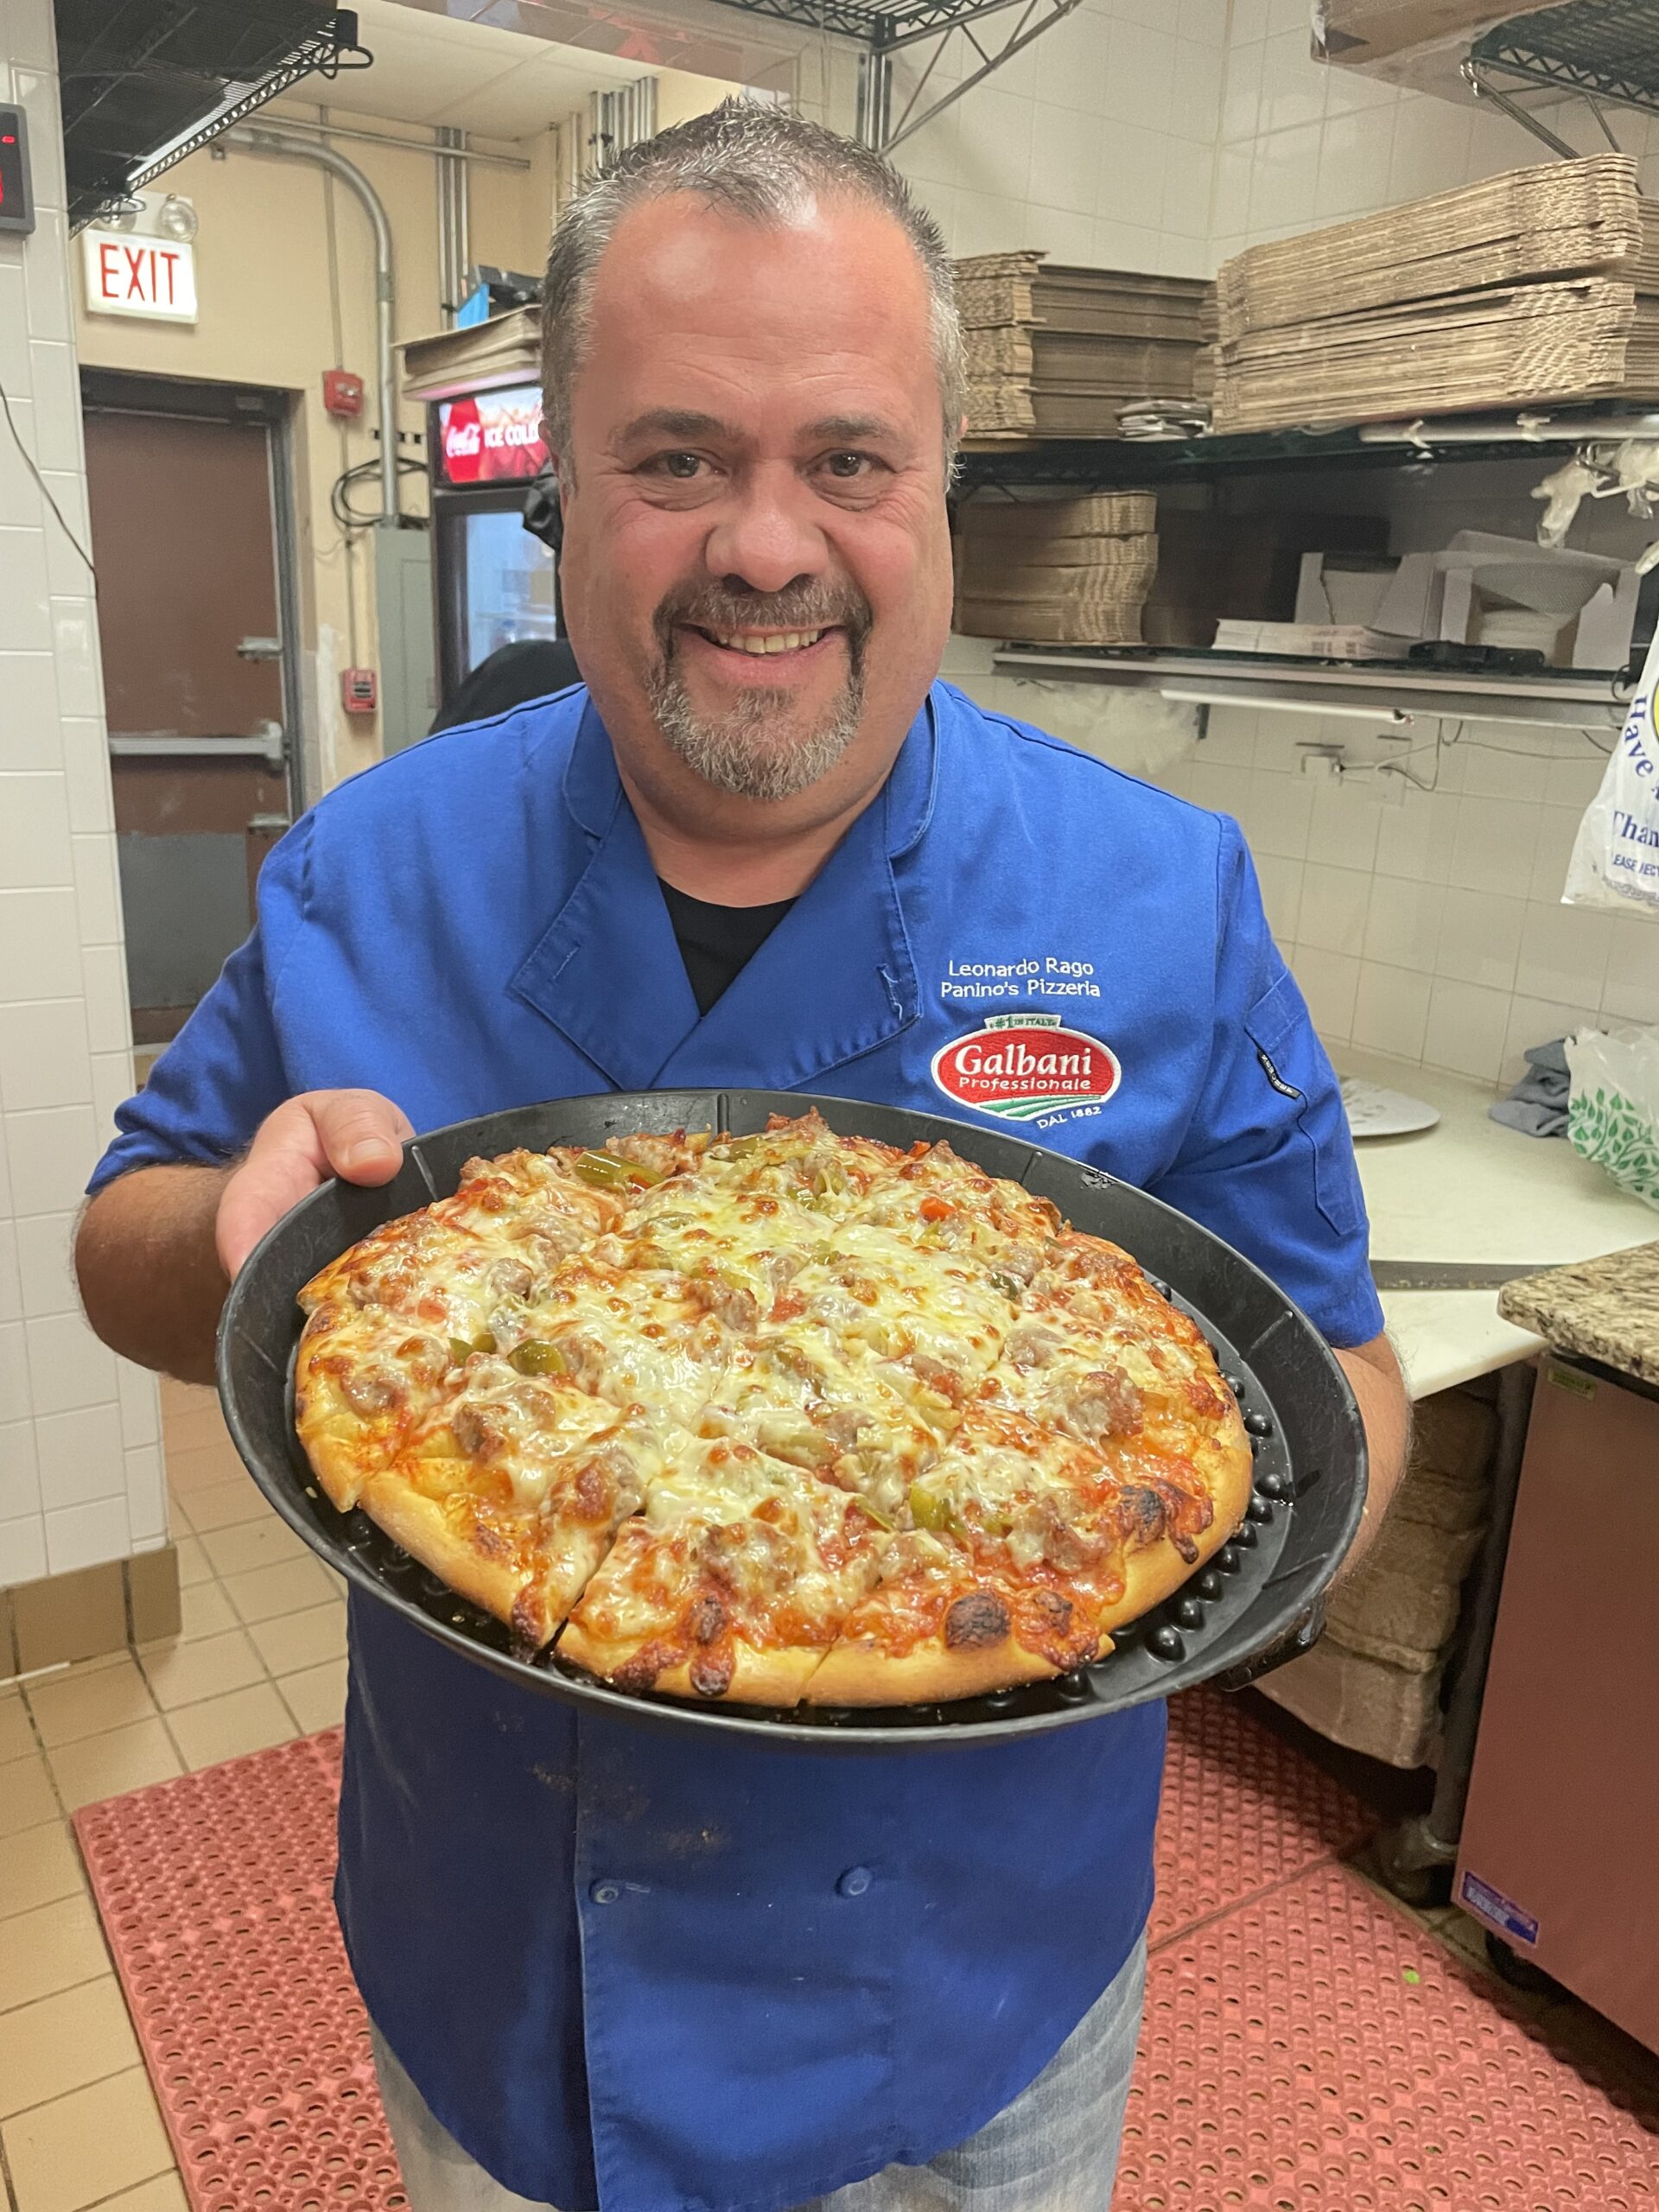 Lenny Rago from Panino’s Pizzeria in Chicago